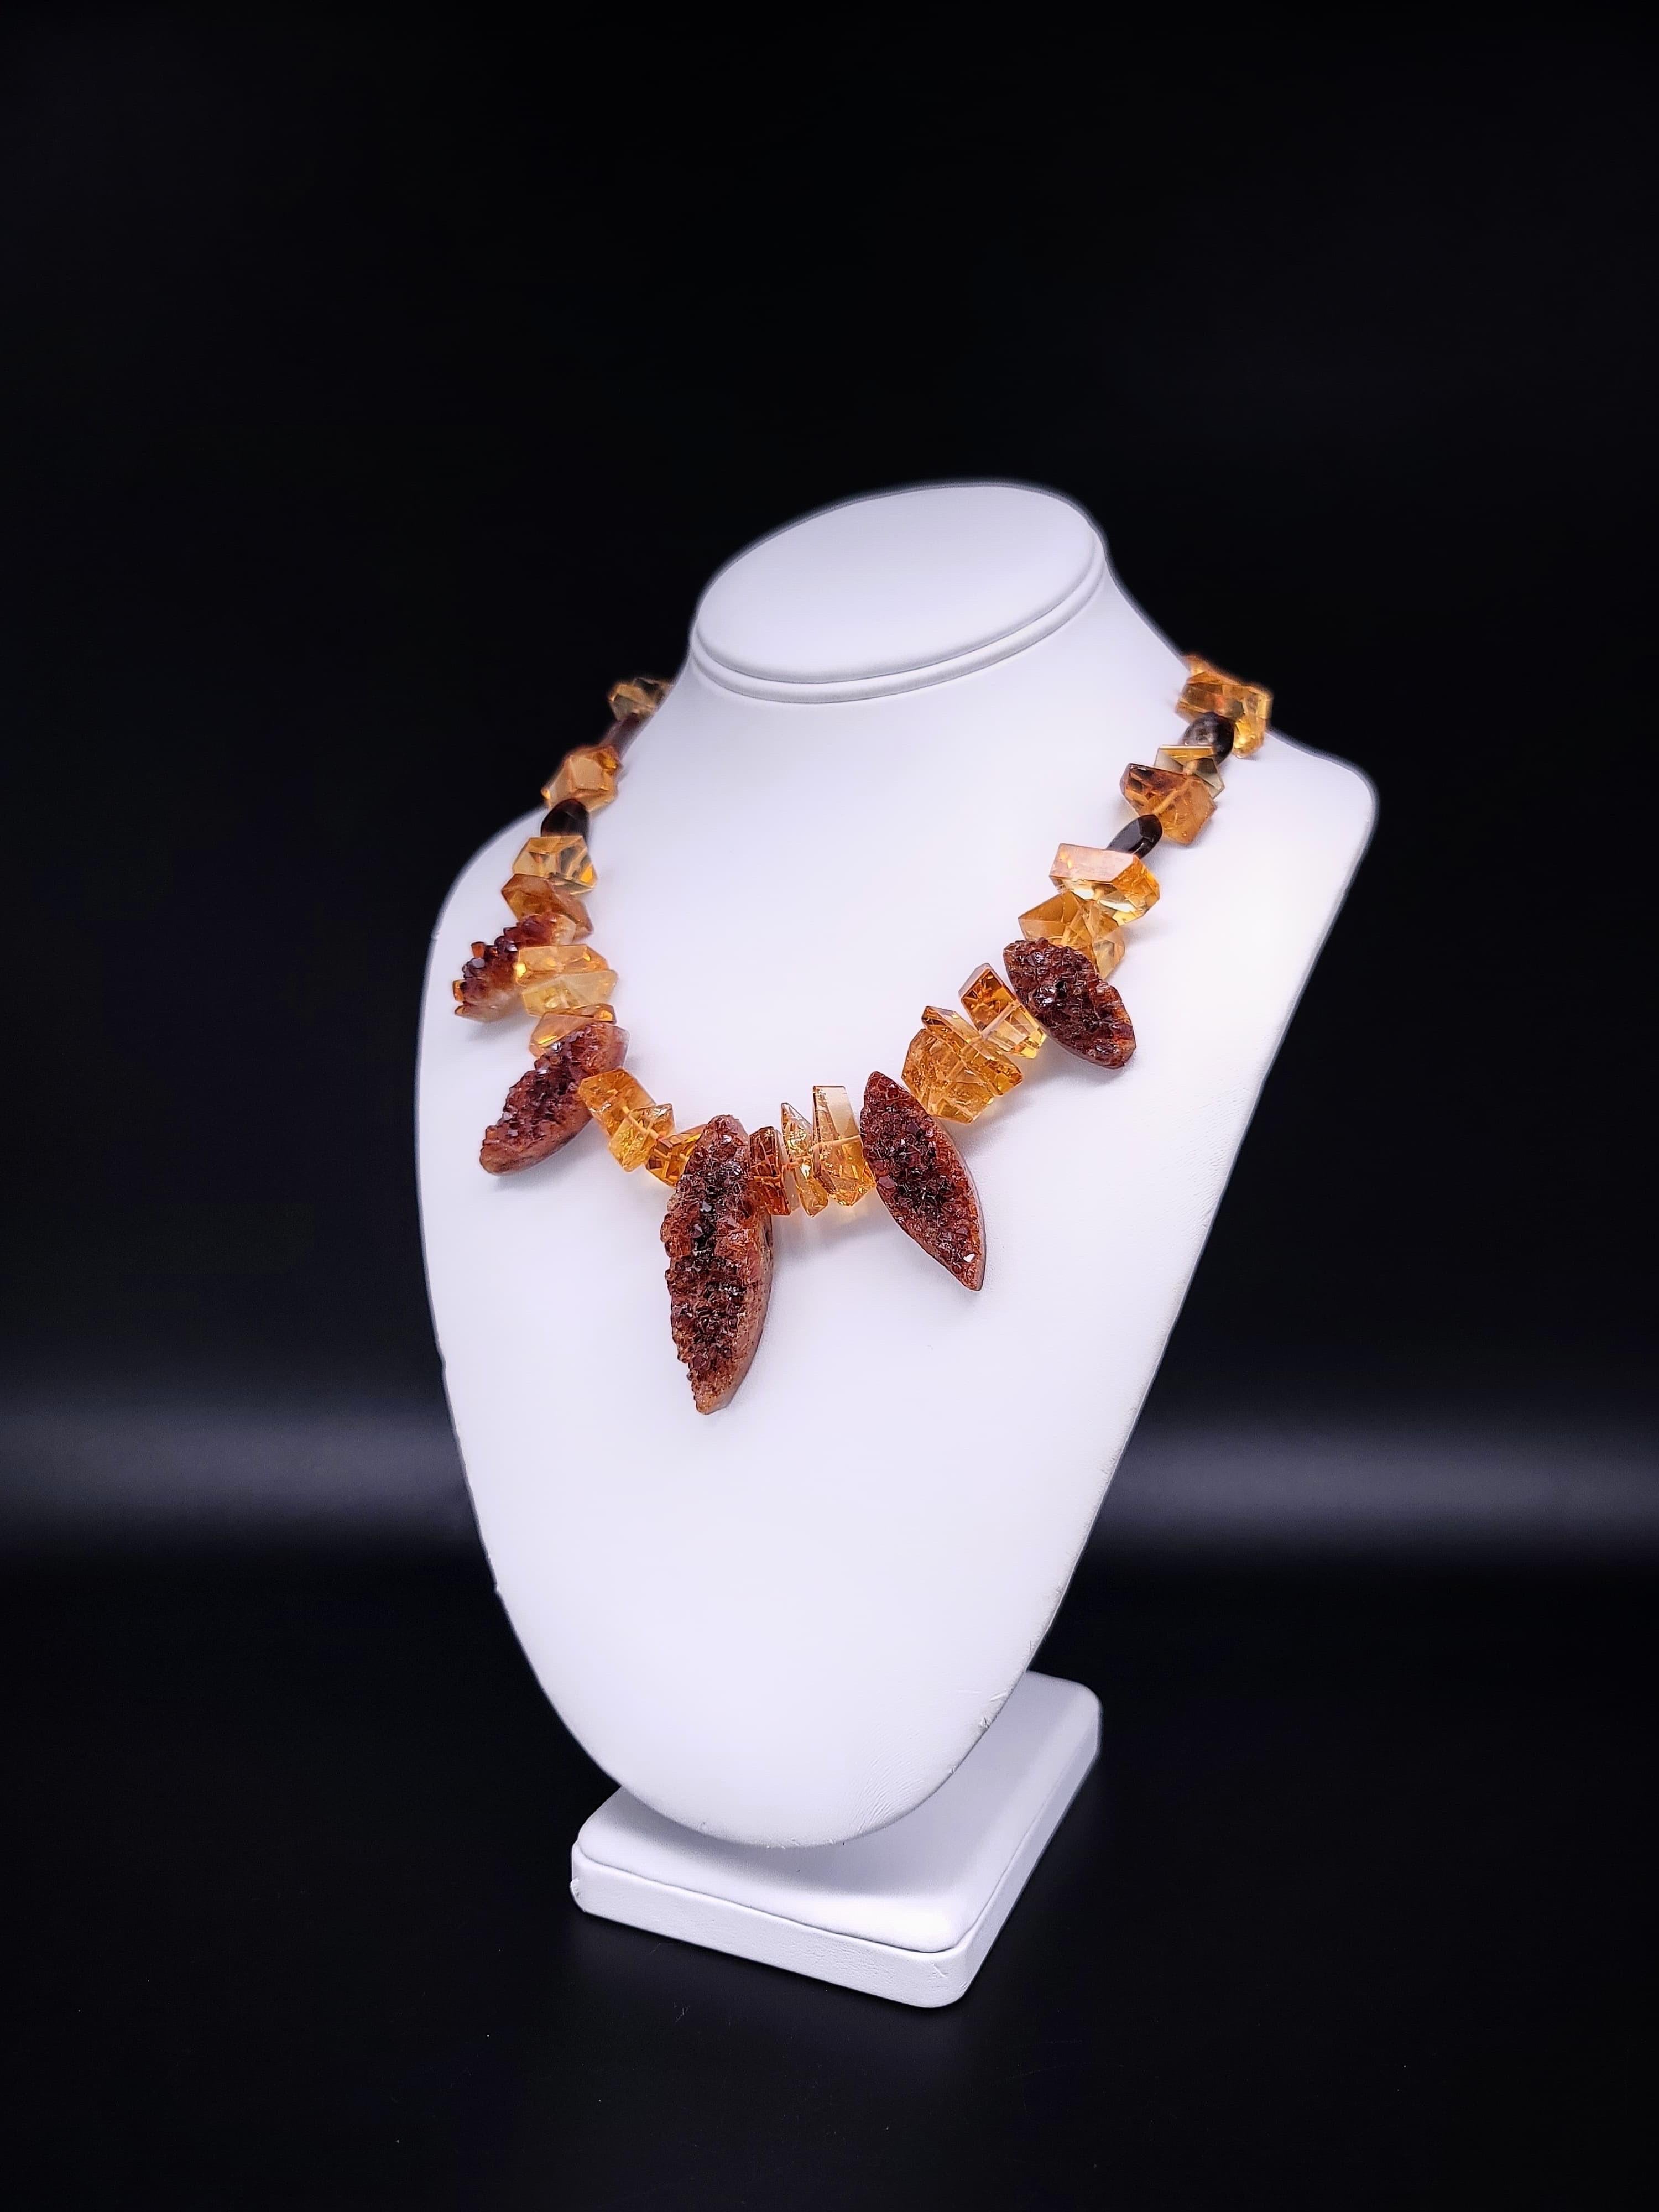 Mixed Cut A.Jeschel Citrine and Citrine geodes necklace. For Sale